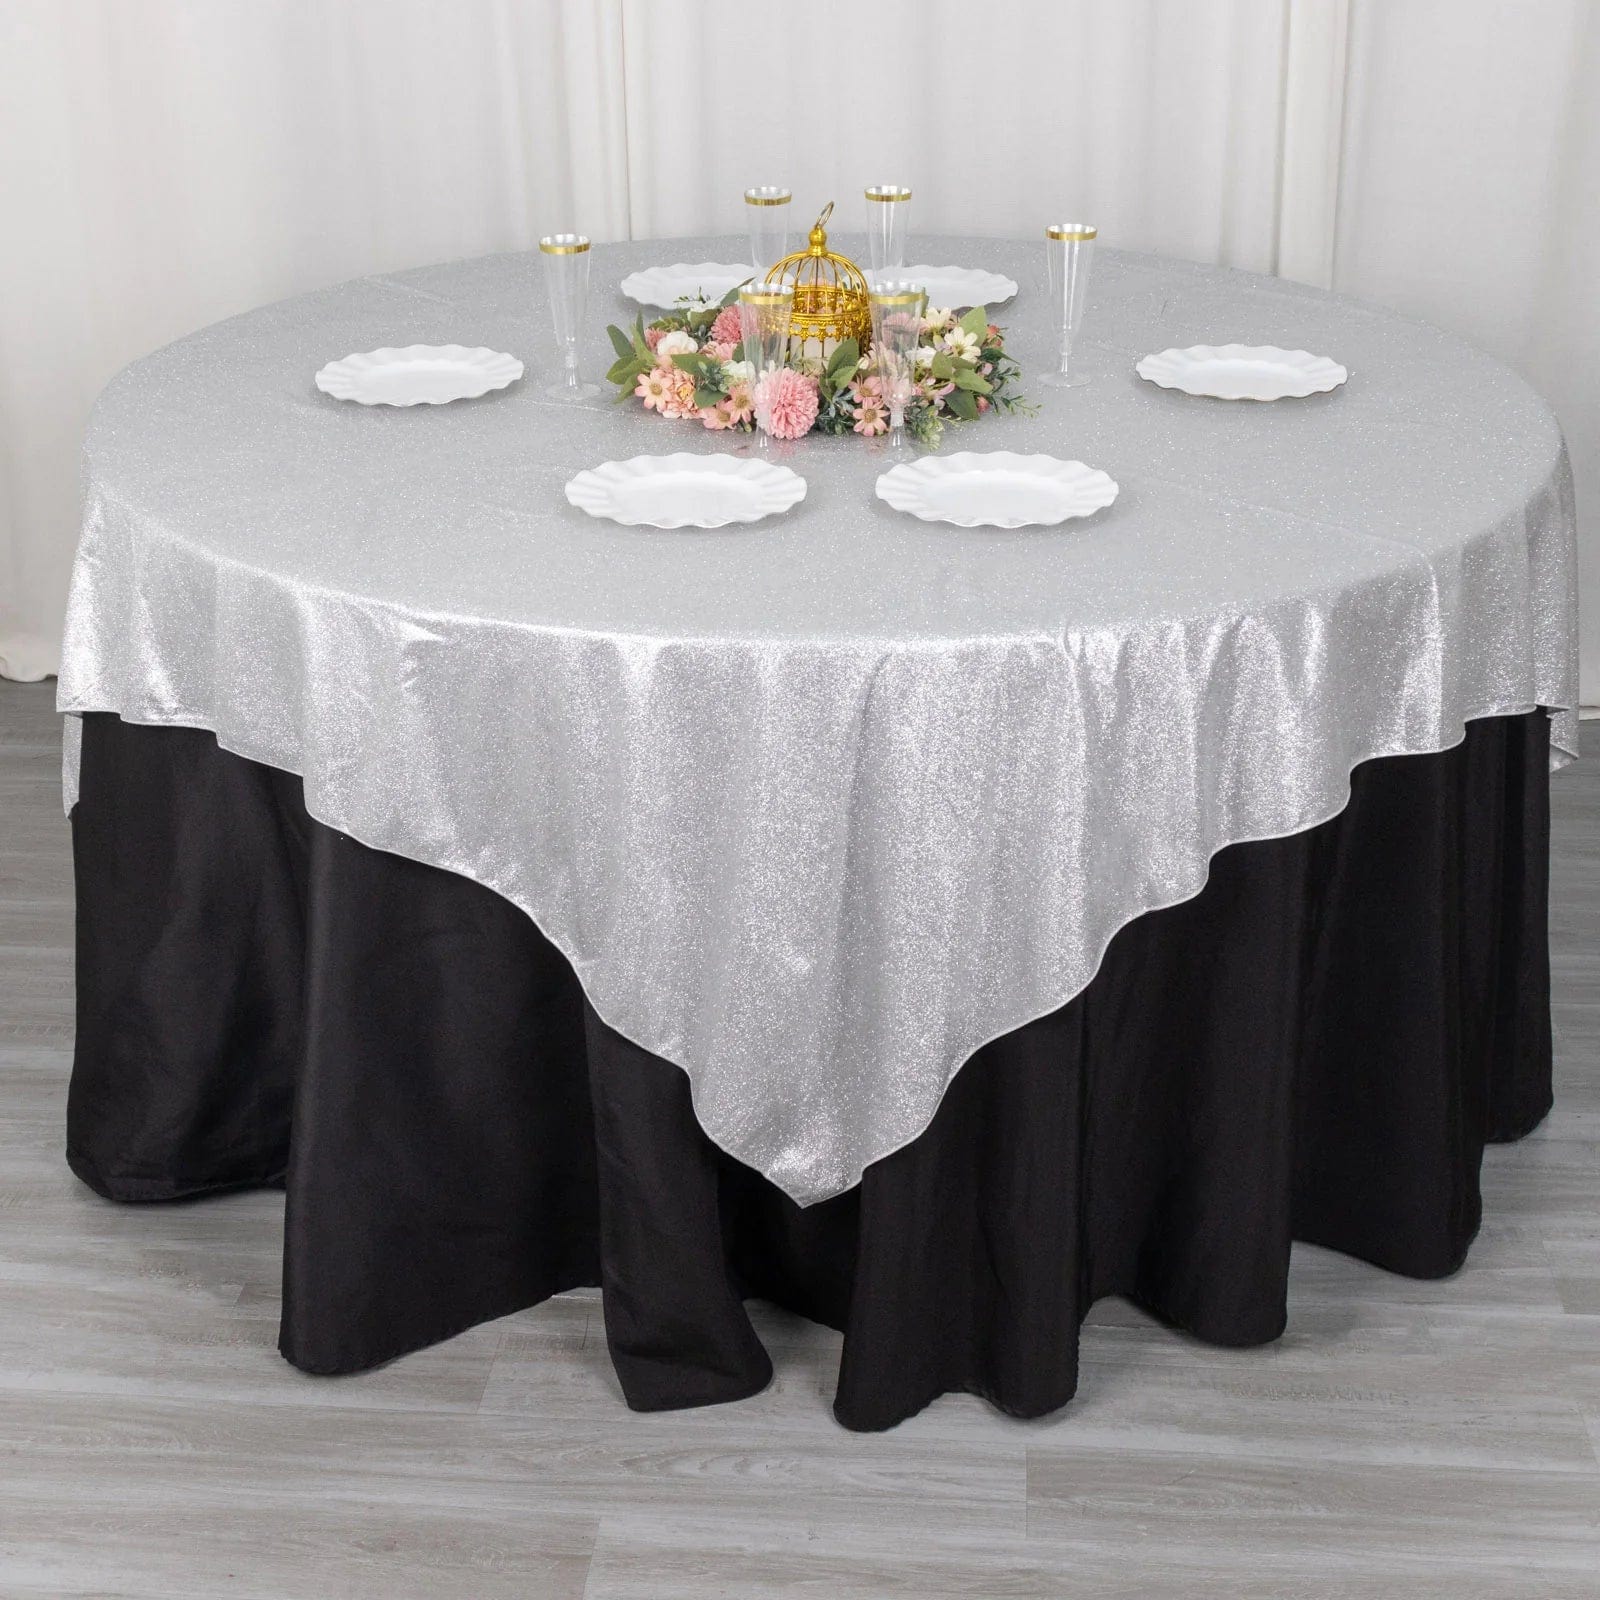 72x72 in Glittered Polyester Square Table Overlay